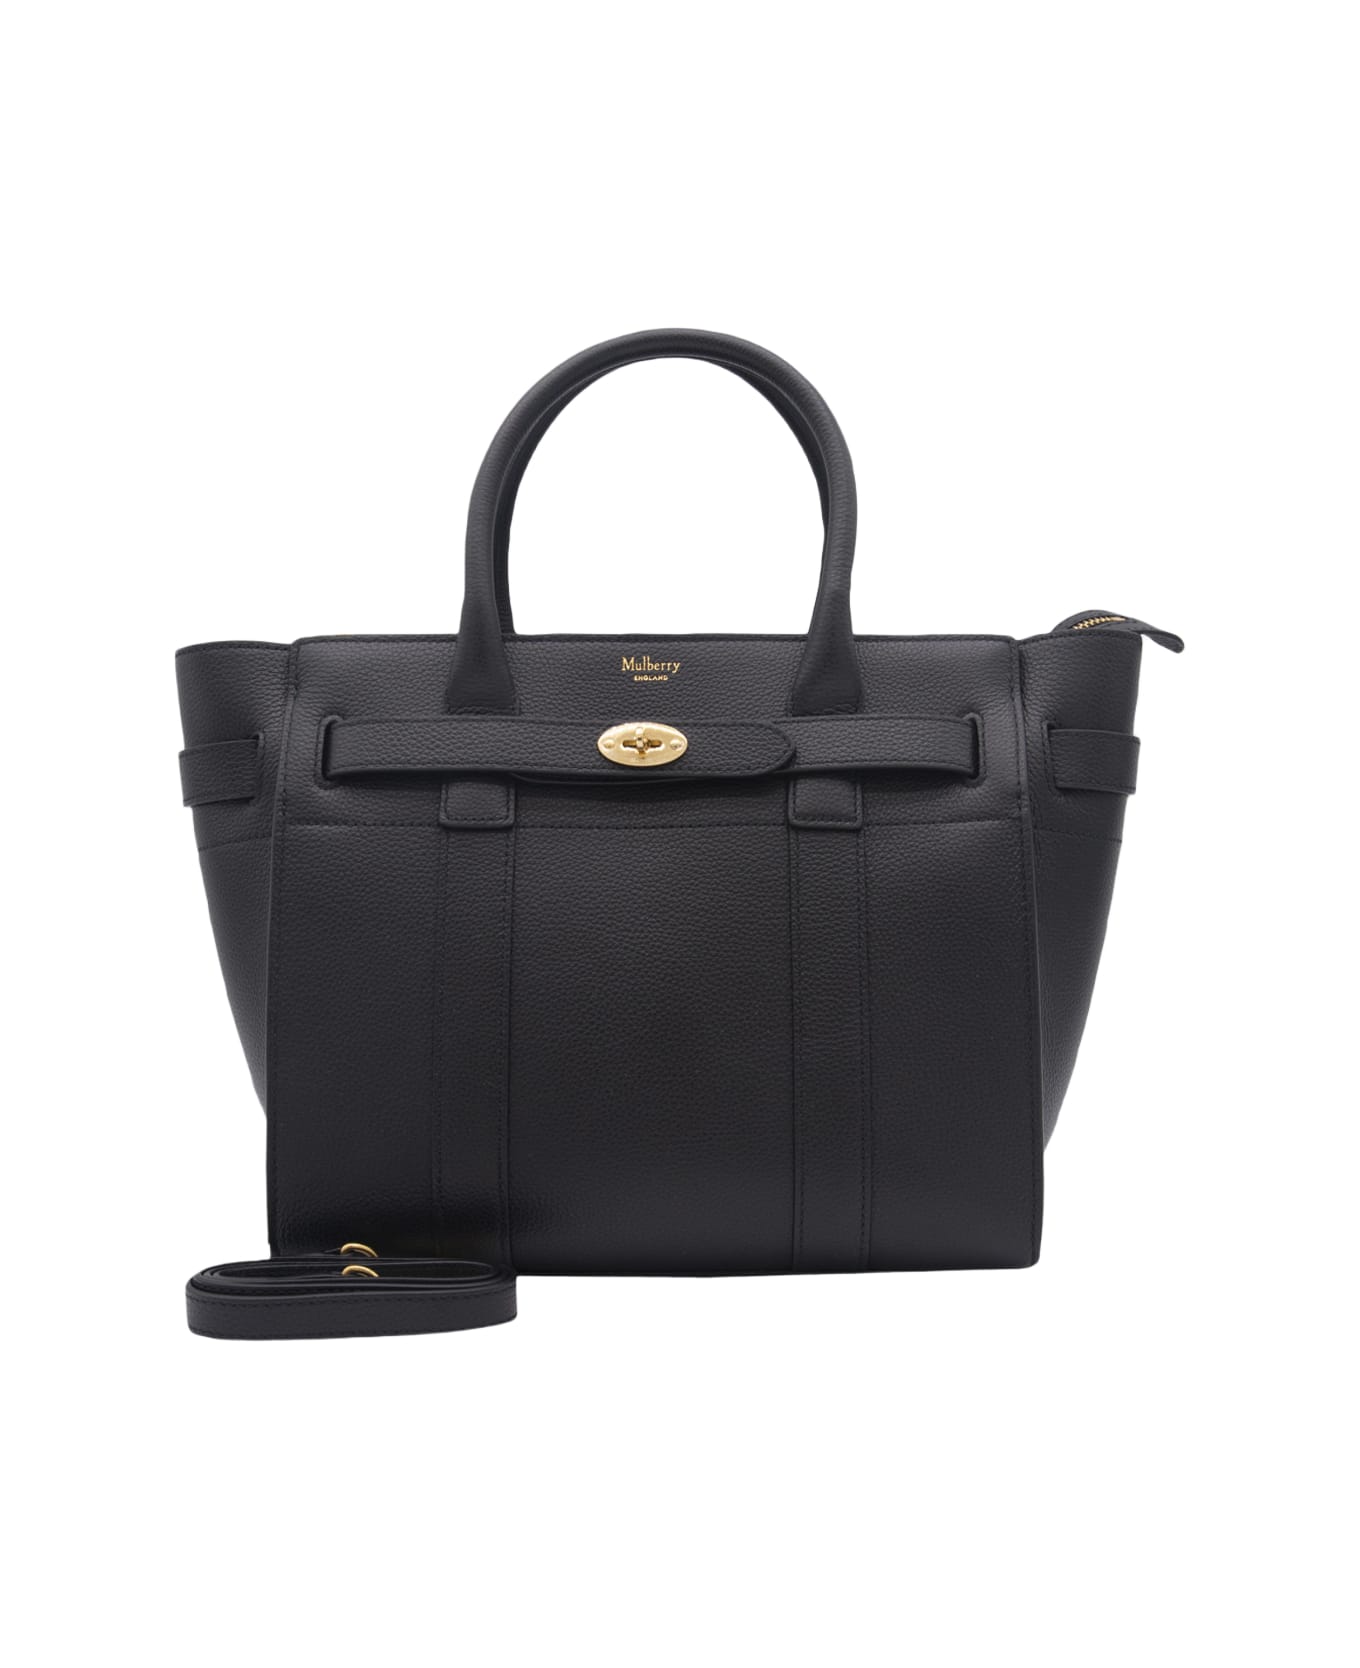 Mulberry Black Leather Tote Bag - Black